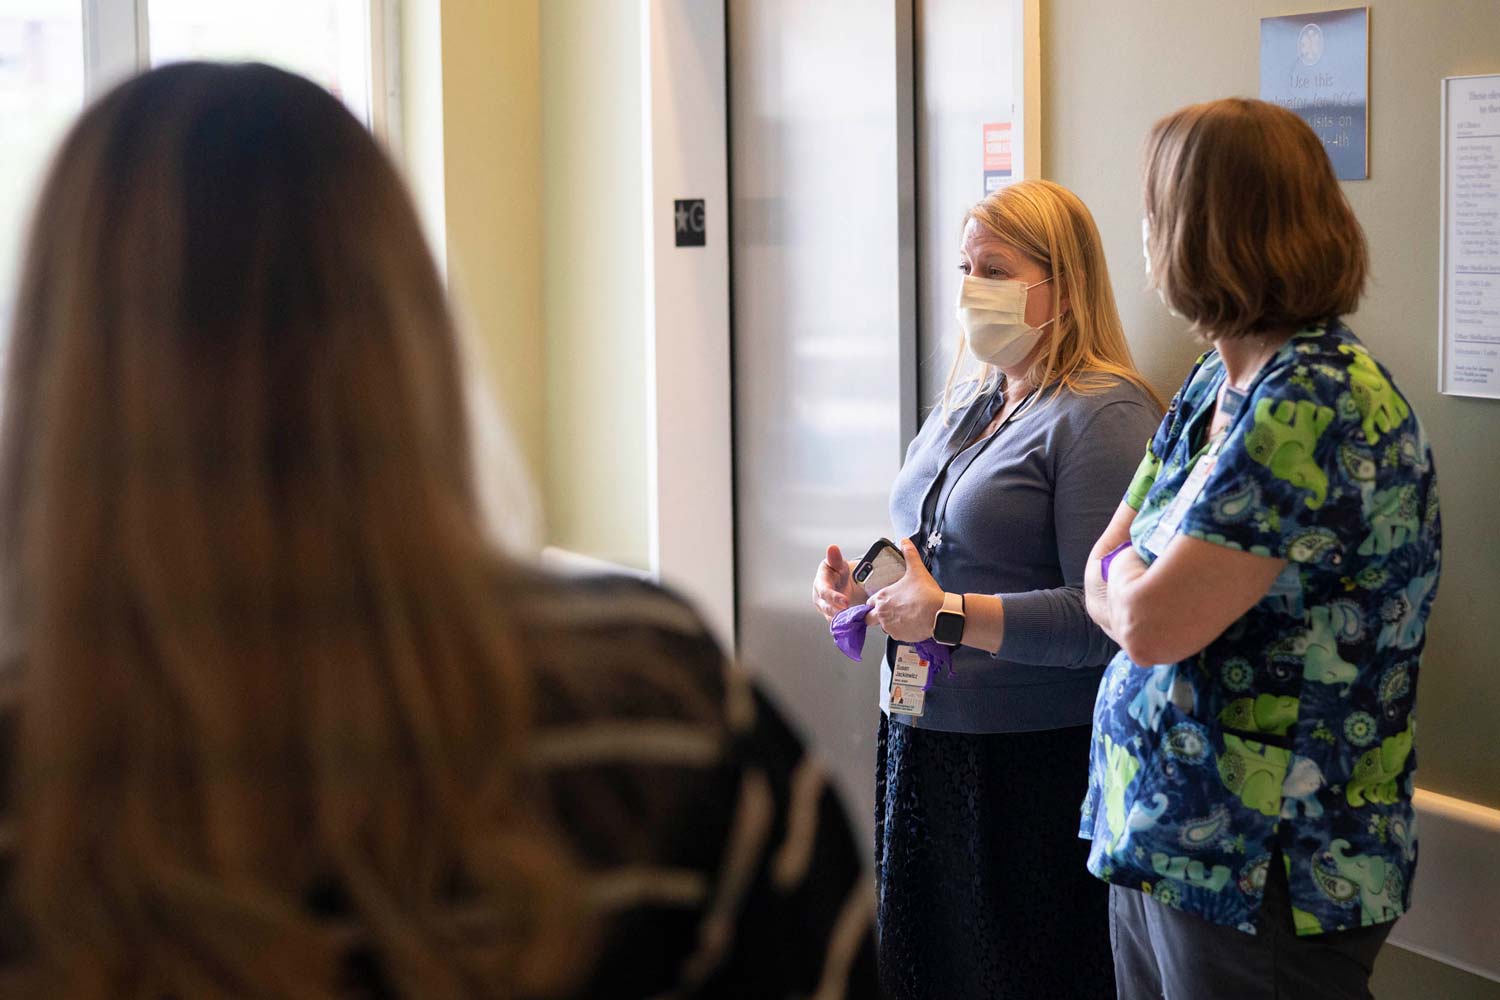 Nursing staff stand in a hallway having a meeting